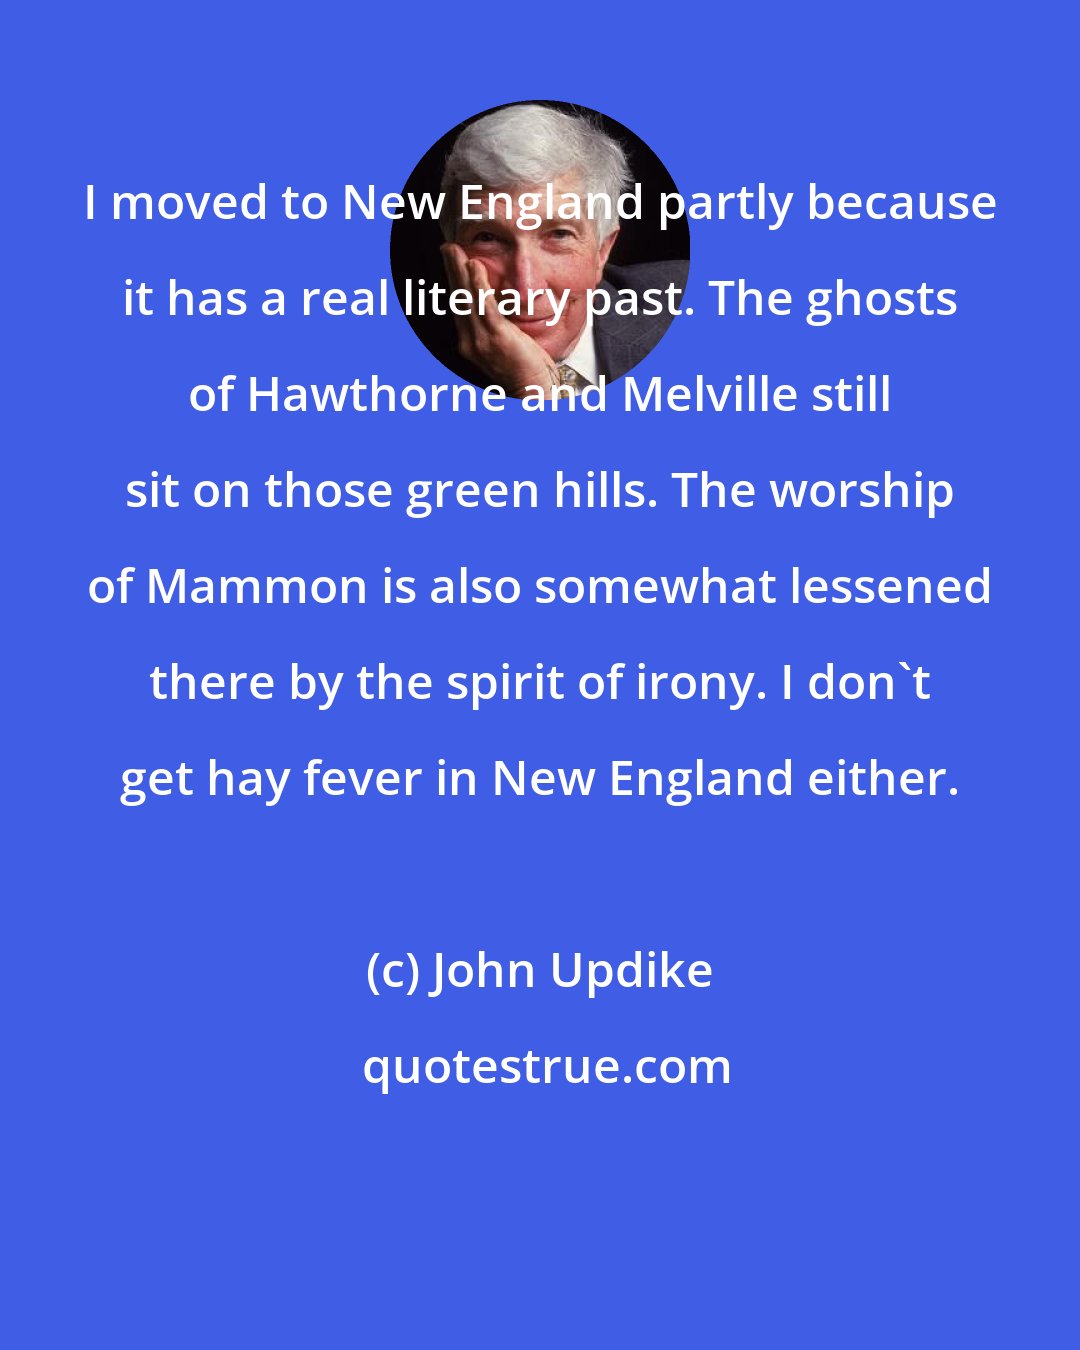 John Updike: I moved to New England partly because it has a real literary past. The ghosts of Hawthorne and Melville still sit on those green hills. The worship of Mammon is also somewhat lessened there by the spirit of irony. I don't get hay fever in New England either.